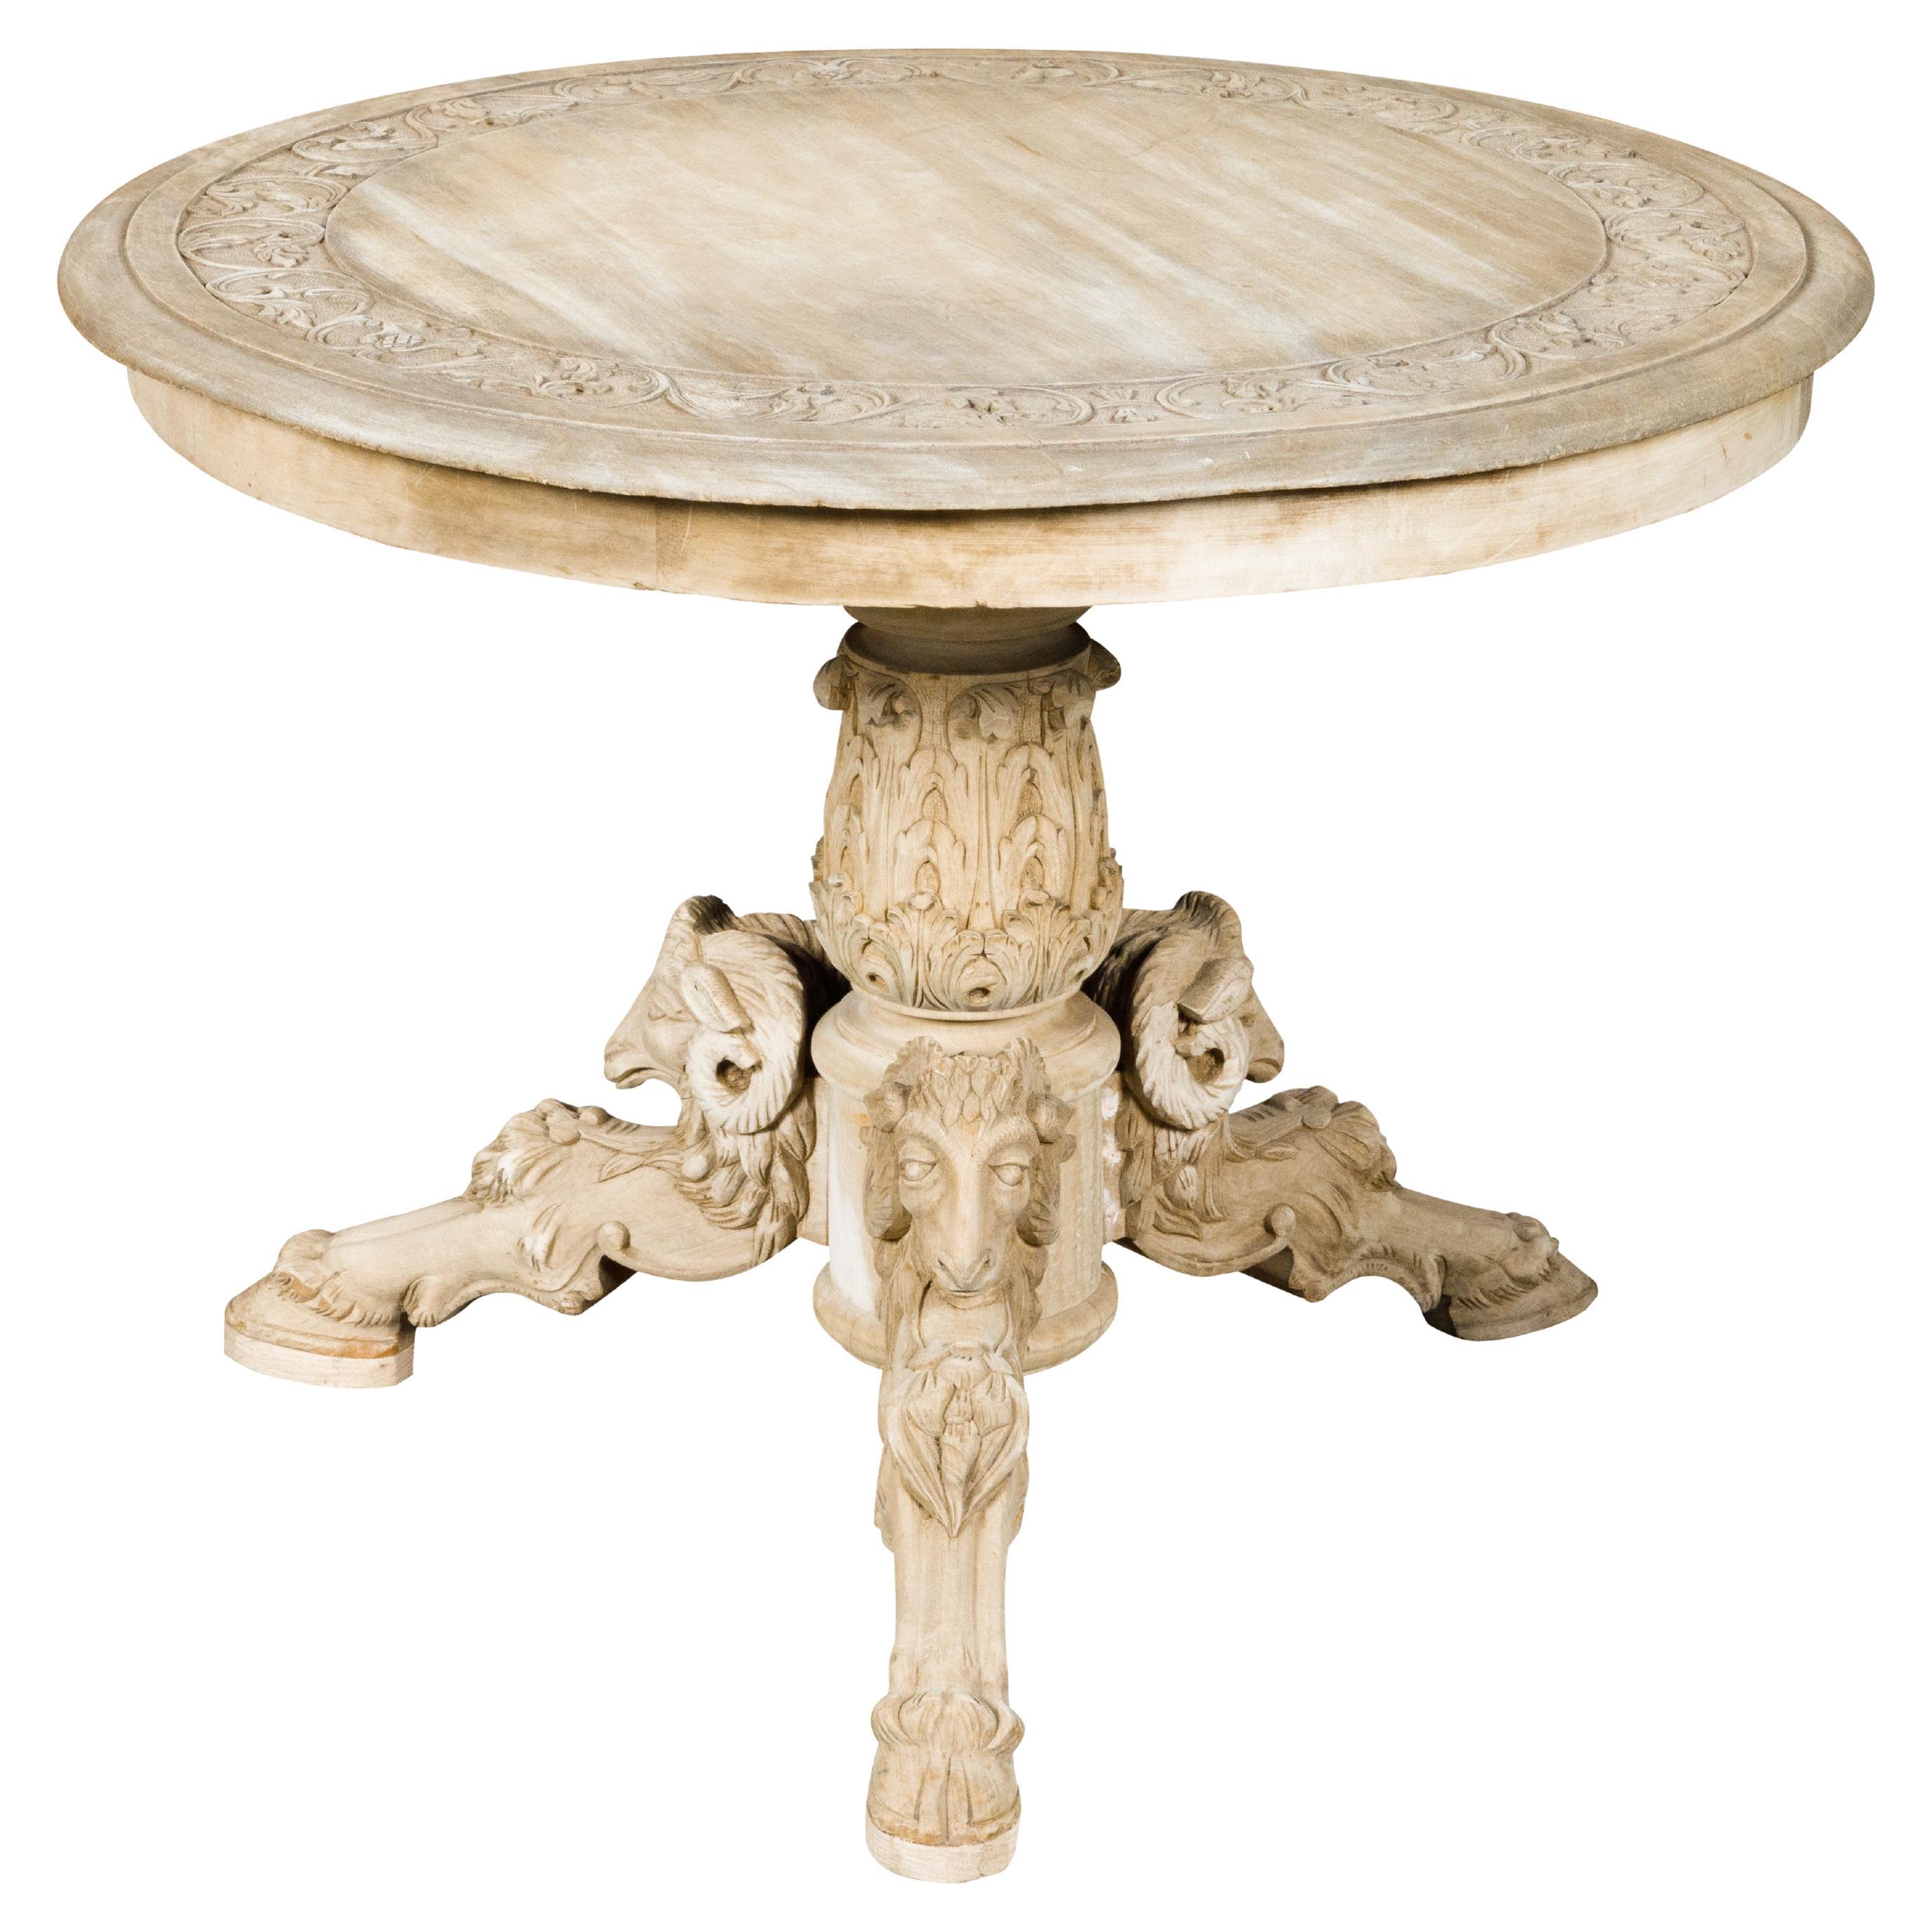 French 1900s Round Top Pedestal Table with Carved Rams' Heads and Scrollwork For Sale